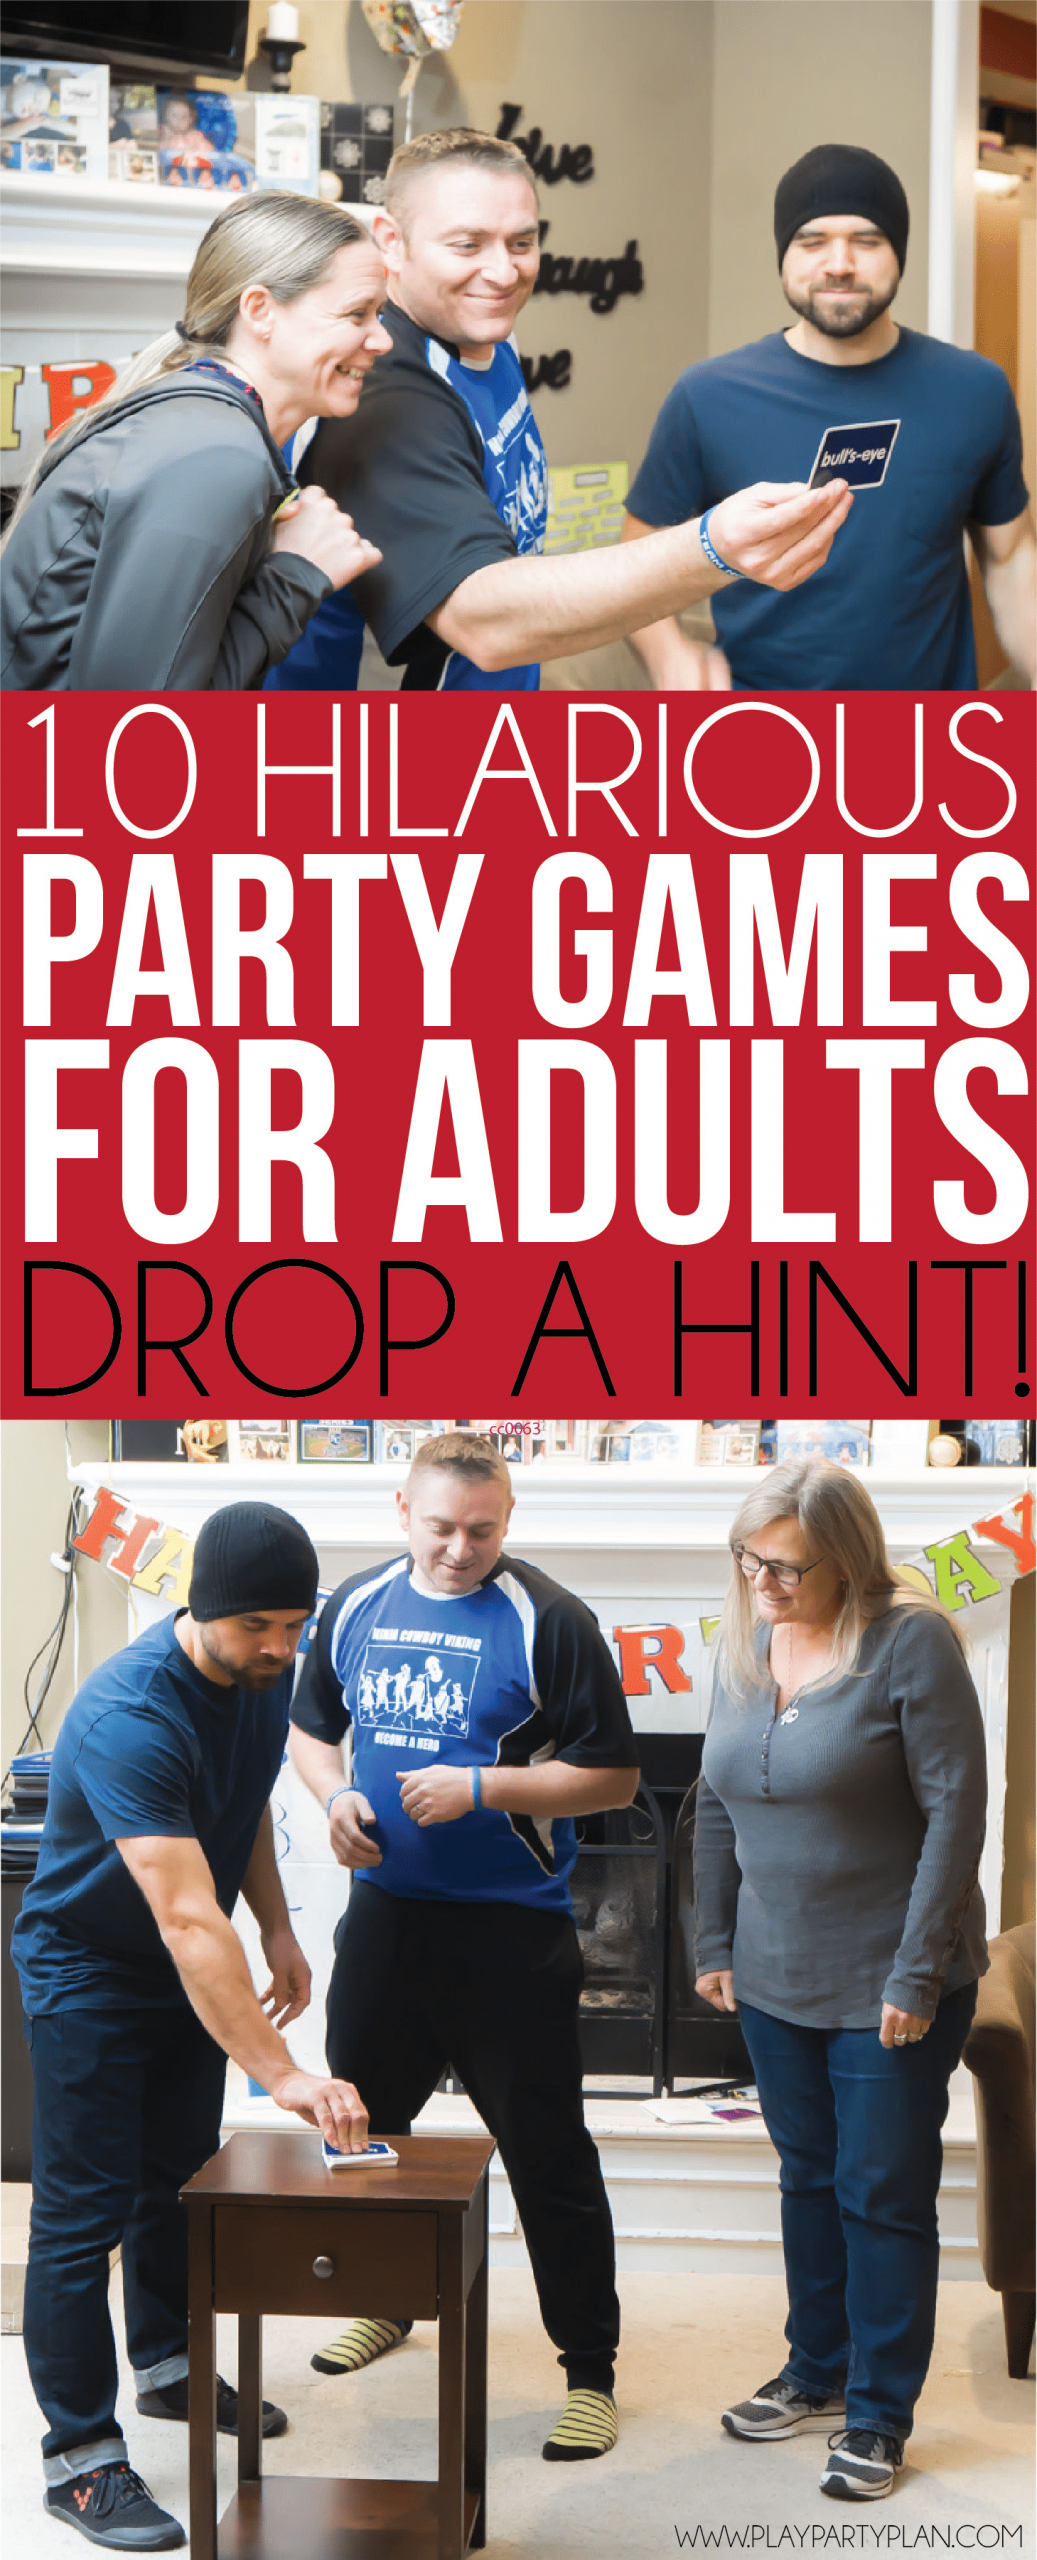 Adult Fun Activities
 19 Hilarious Party Games for Adults Play Party Plan